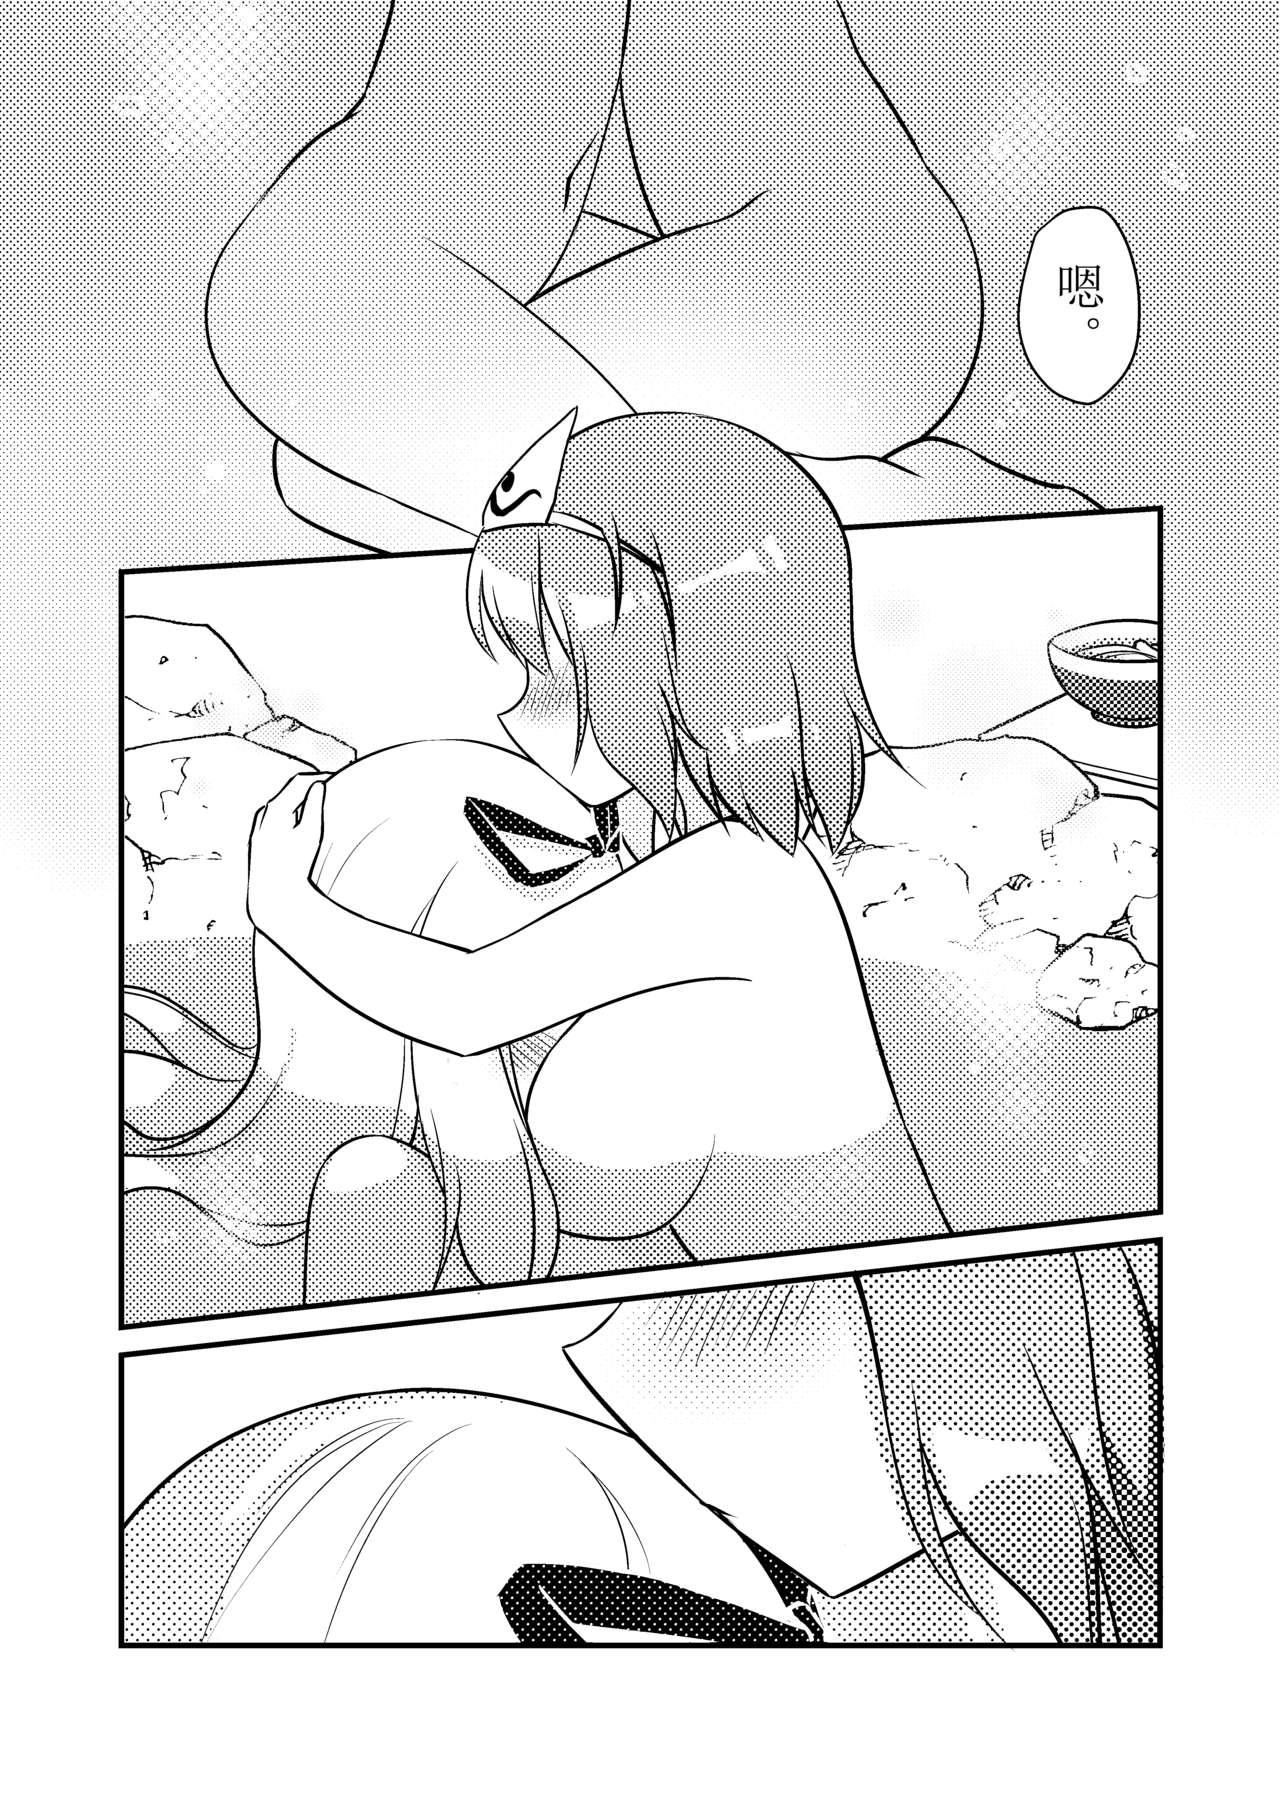 Boobs ????一起泡温泉吧！ - Touhou project Japanese - Page 10